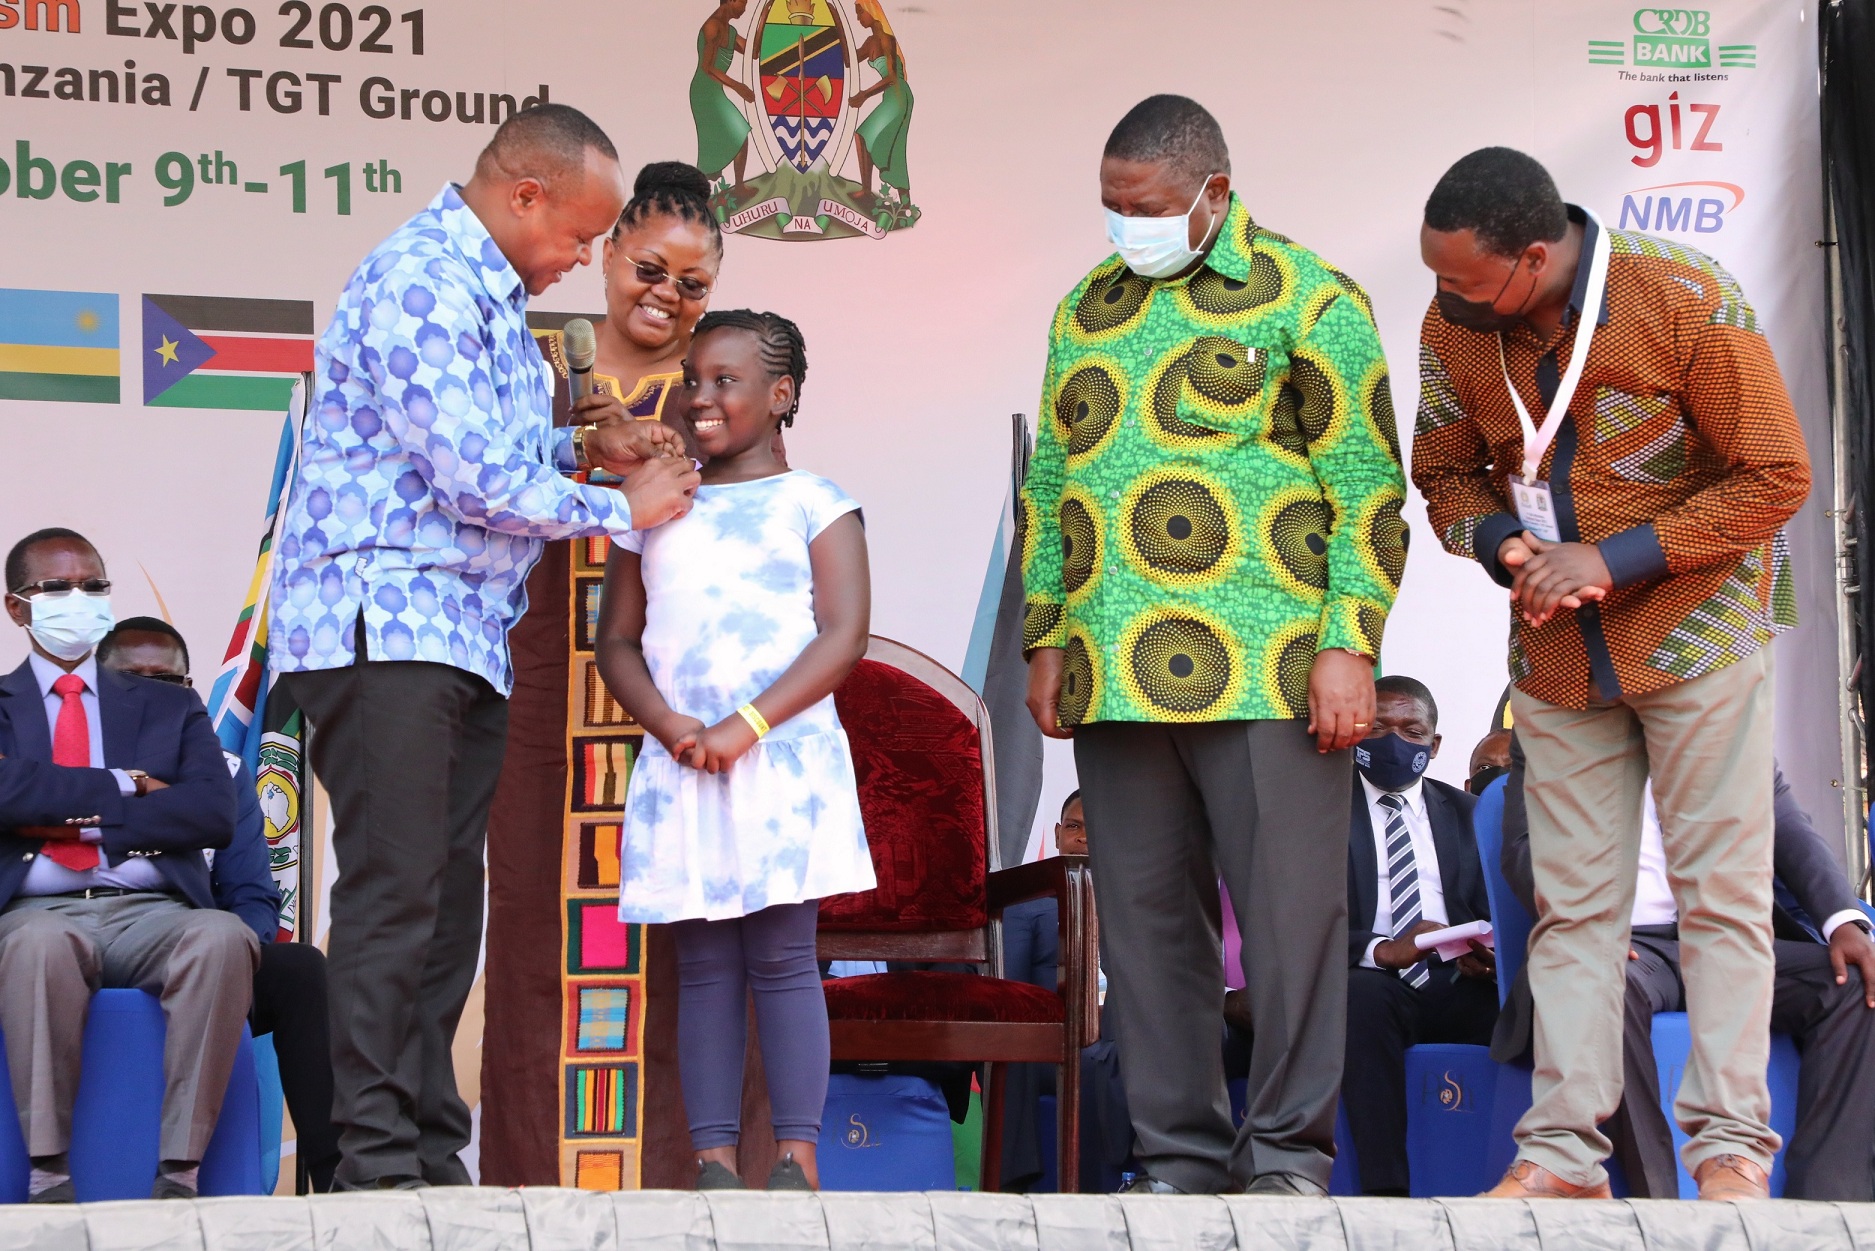 EAC Secretary General Hon. (Dr.) Peter Mathuki (left) confers a badge on Ms. Sharon RIngo designating her as an EAC Ambassador. Ms. Ringo, a standard six pupil, had entertained guests with a poem on EAC integration during the 1st EAC Tourism Expo in Arusha. Looking are the EAC Deputy Secretary General in charge of Planning and Infrastructure, Eng. Steven Mlote, and Mr. Jean Baptiste Havugimana, the Director of Productive Sectors at the Secretariat.